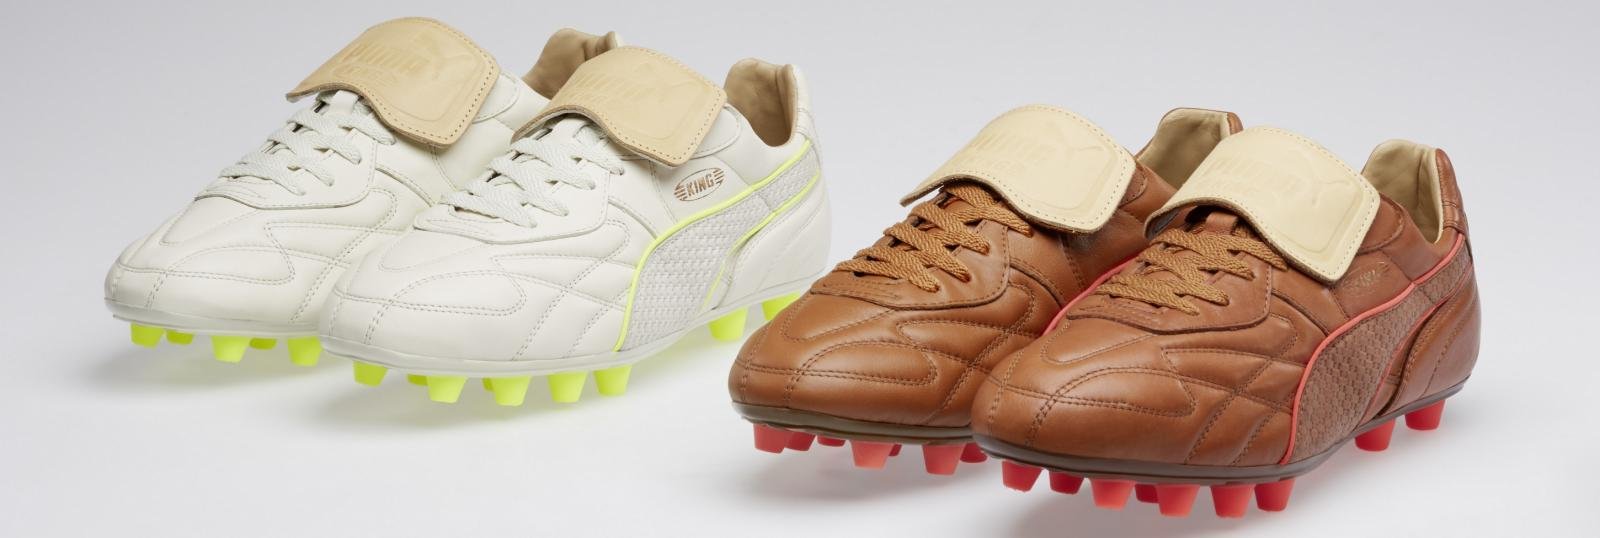 PUMA release legendary special edition ‘Made in Italy’ king football boots